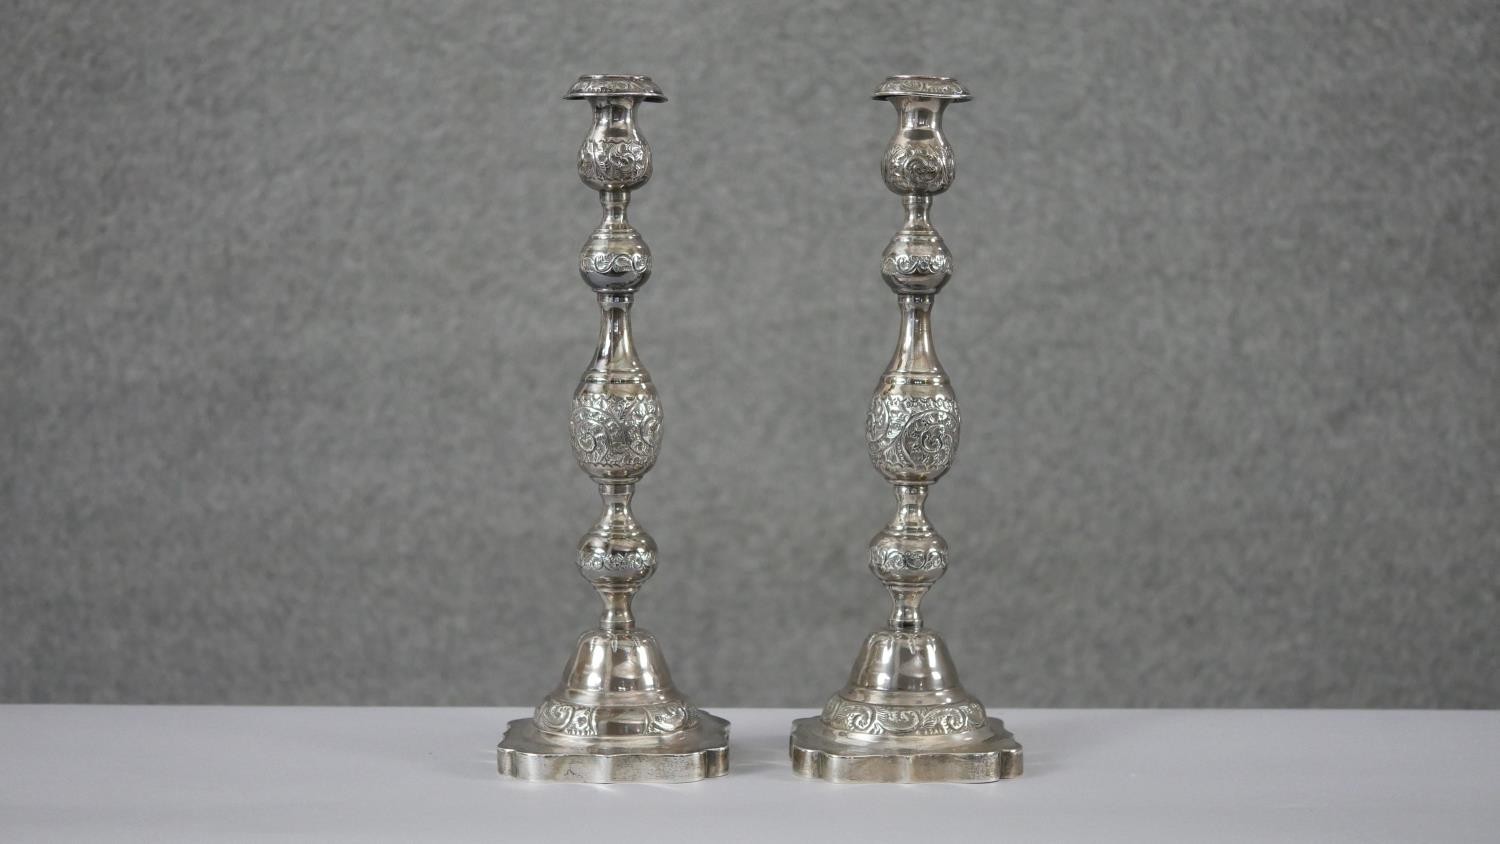 A pair of 1920'a repousse silver candlesticks with scrolling foliate design on scalloped bases.